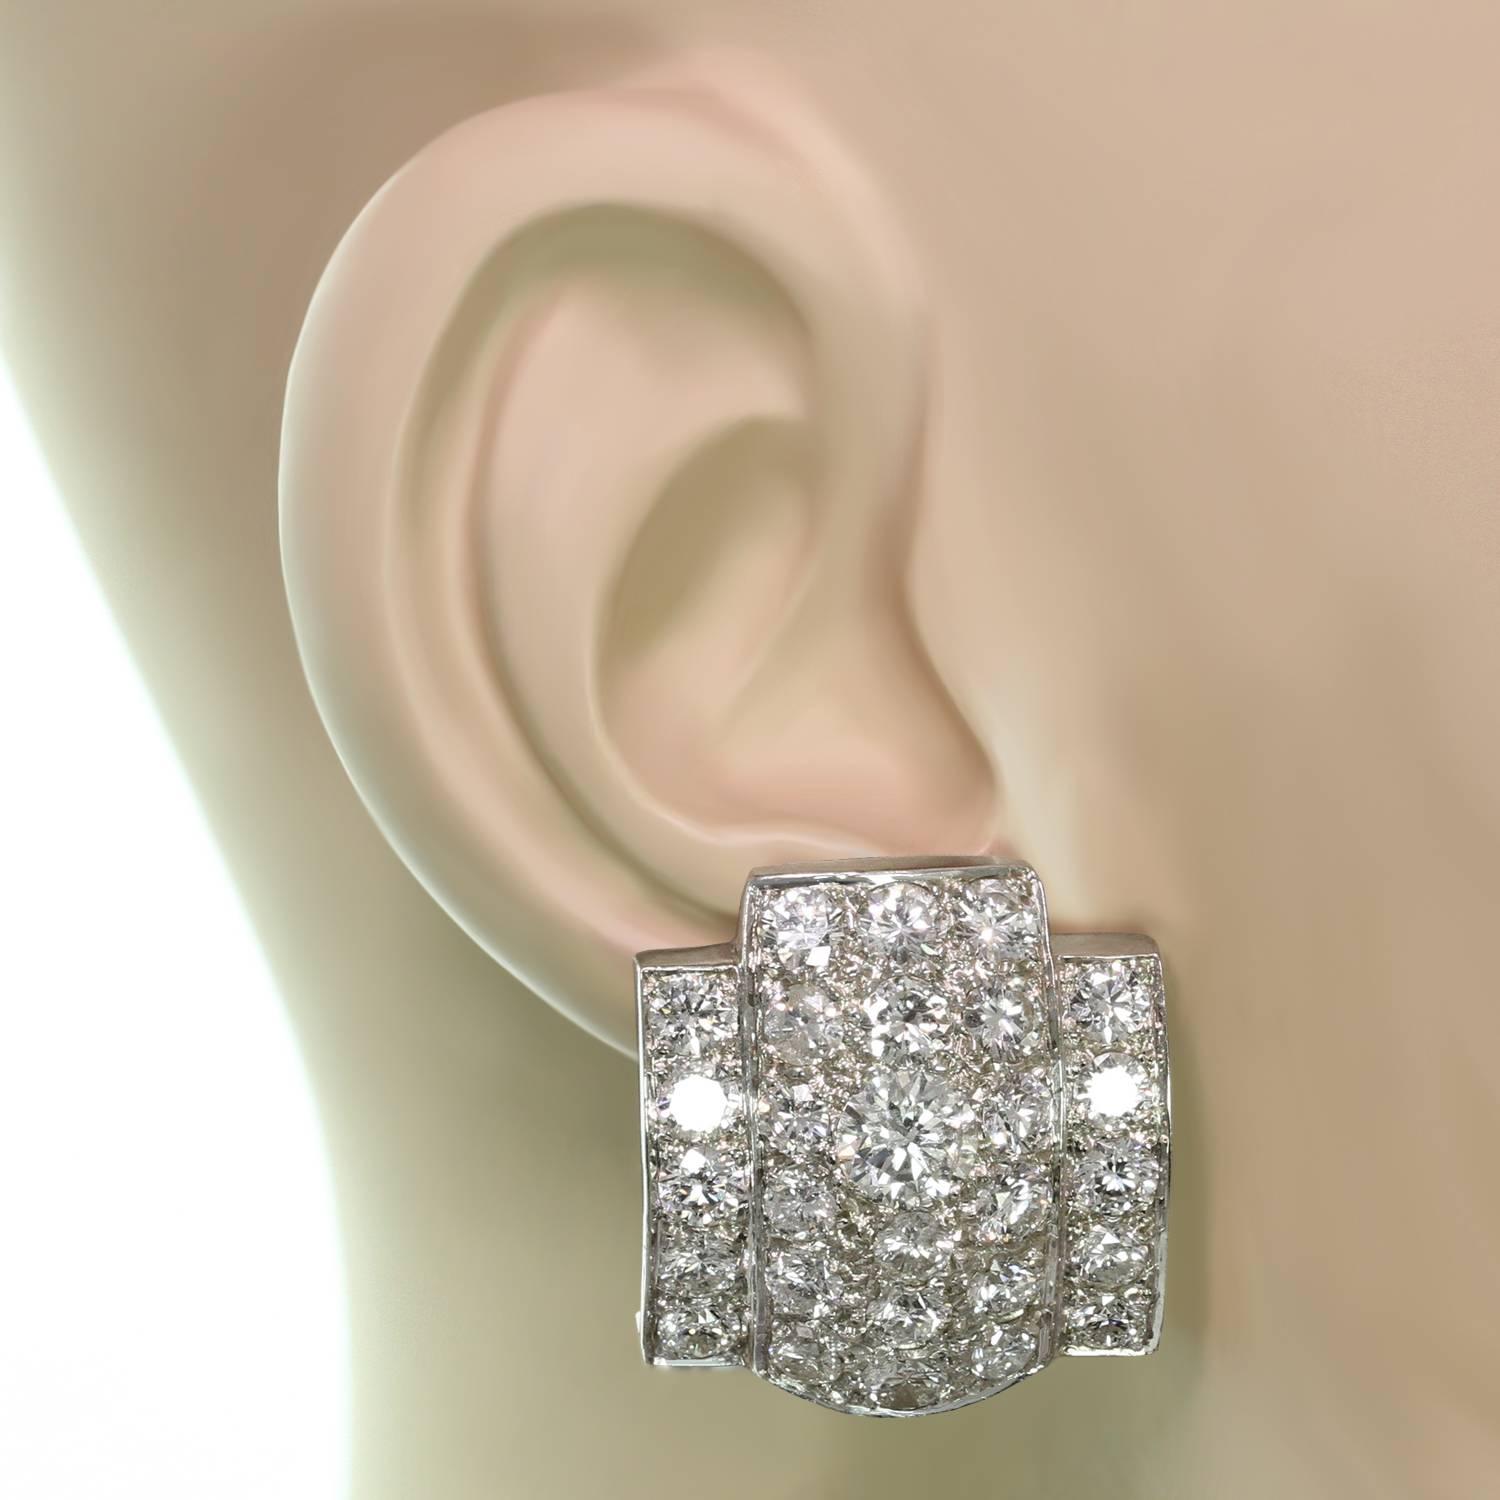 IMPRESSIVE! Retro White Gold Diamond Earrings In Excellent Condition For Sale In New York, NY